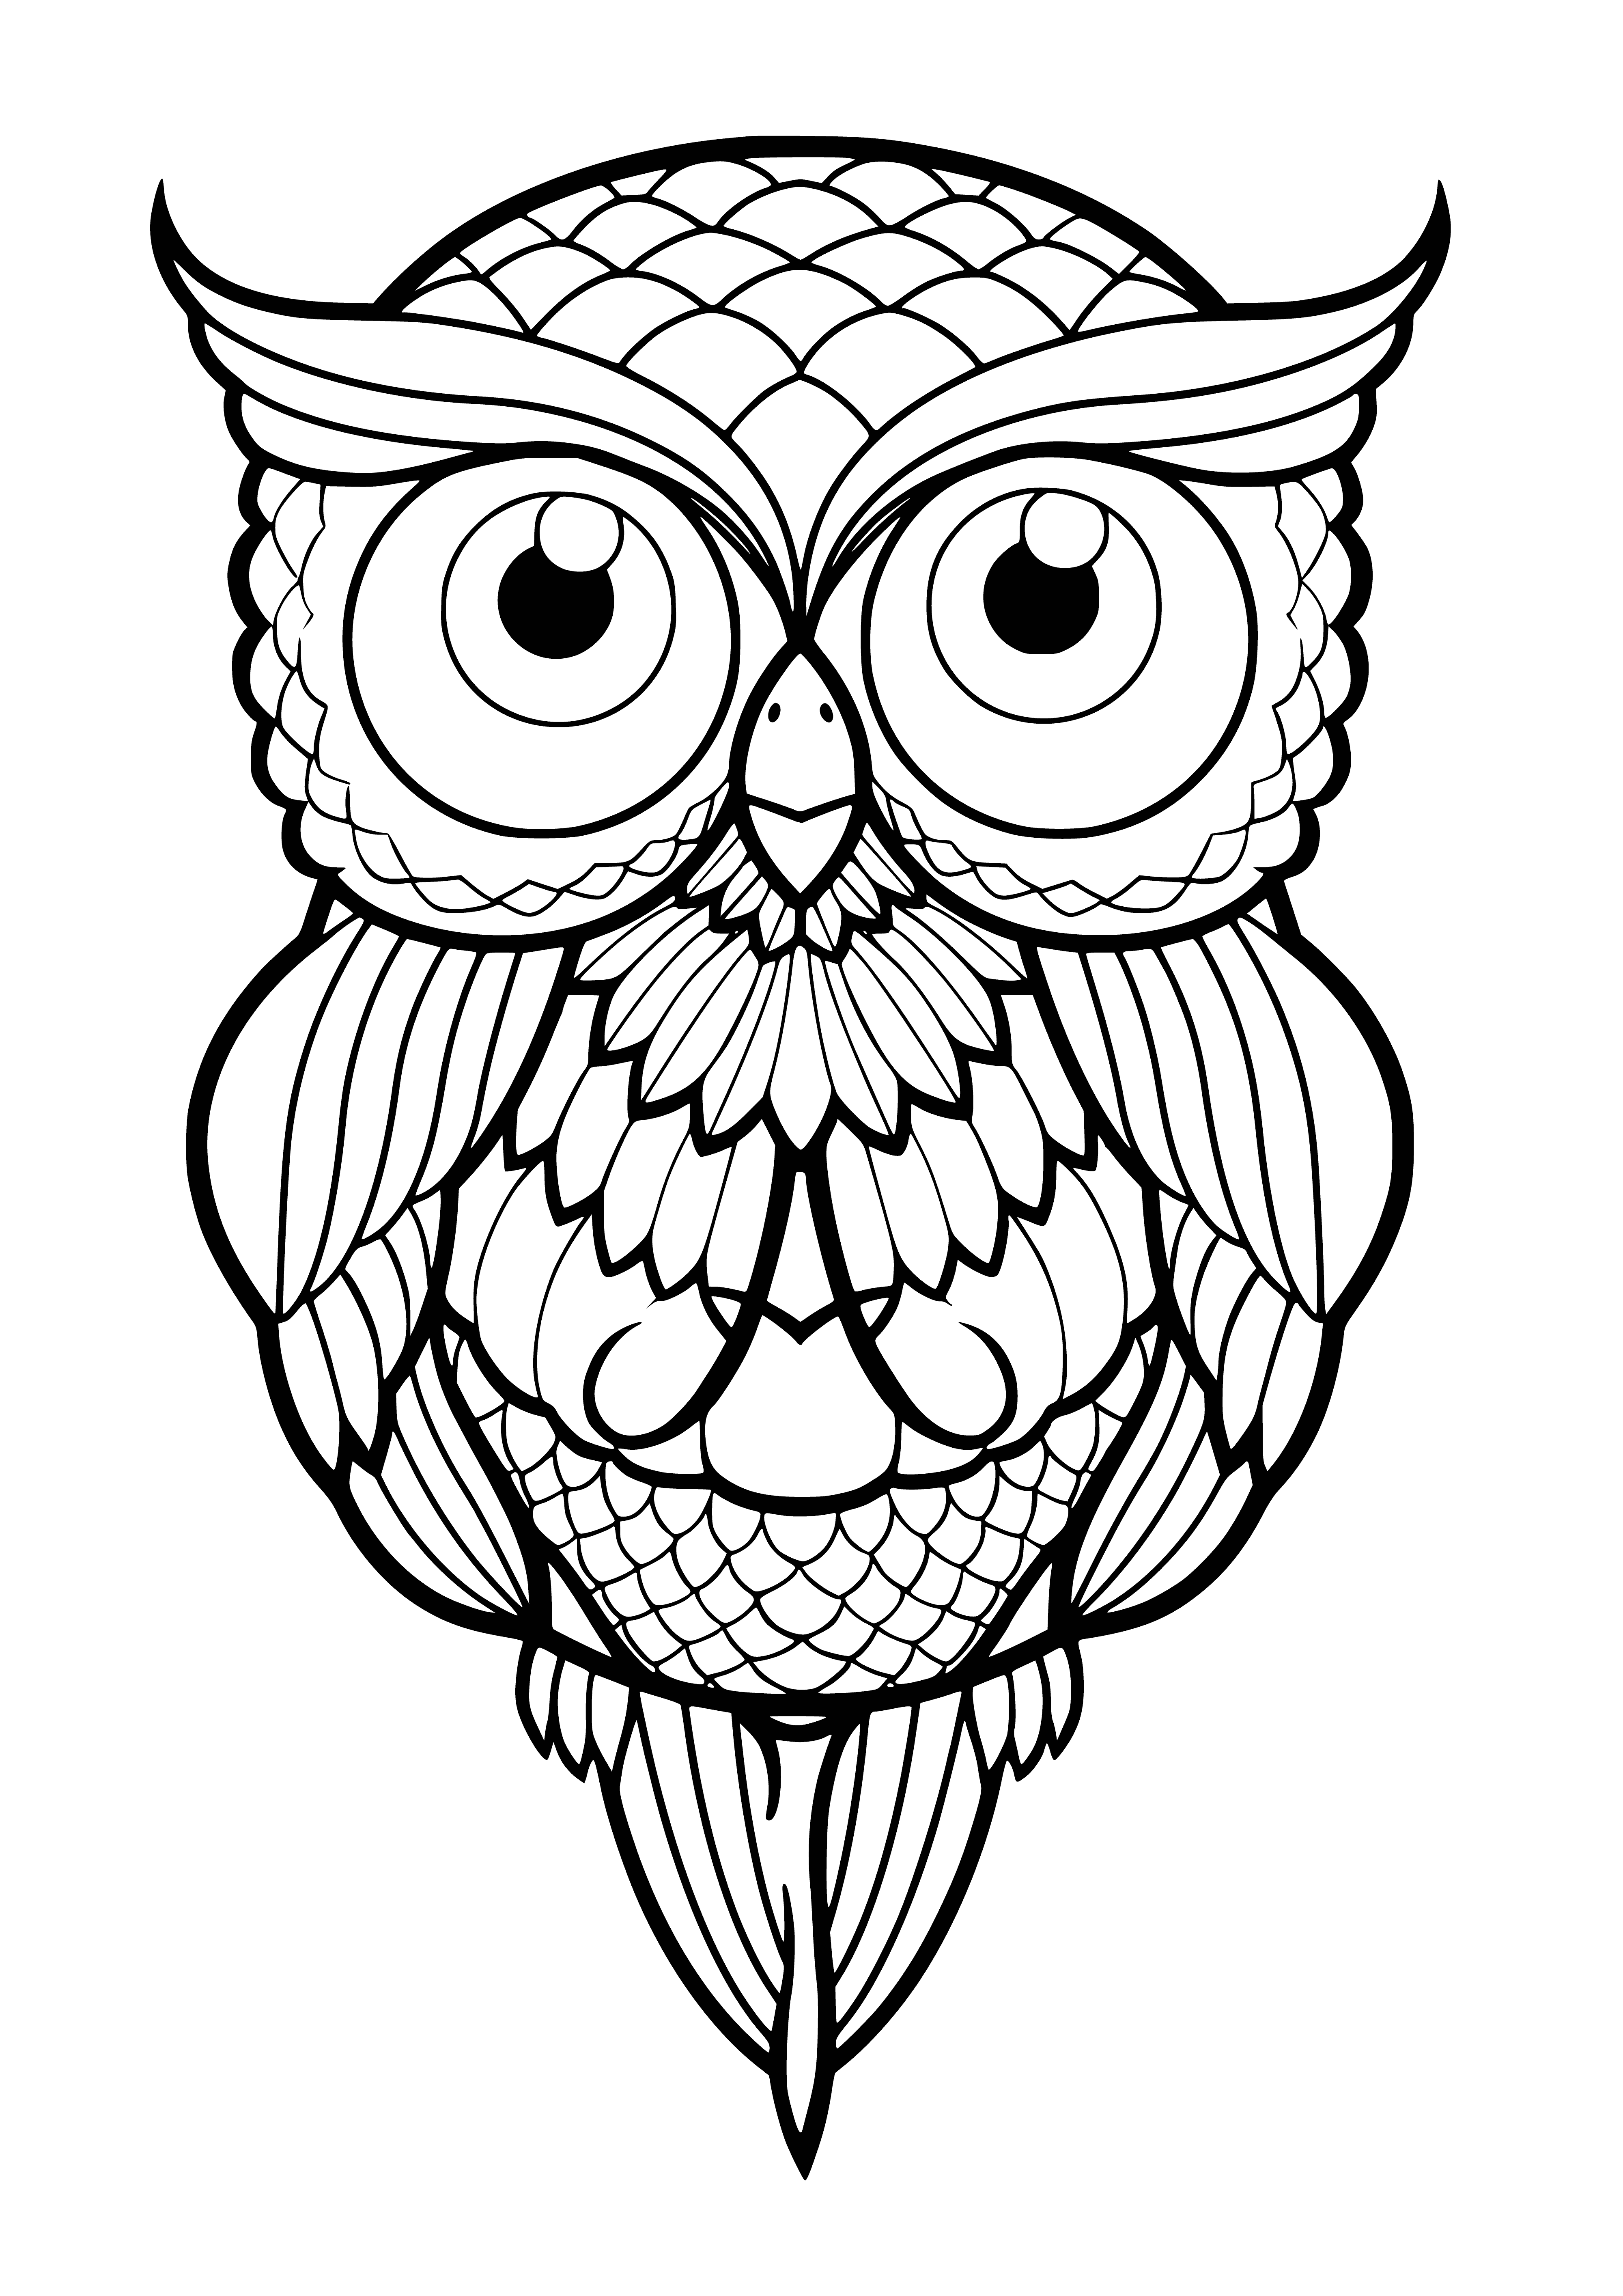 coloring page: Coloring page of a big owl surrounded by smaller ones with various patterns--fun for relieving stress! #coloring #antistressowls #owls